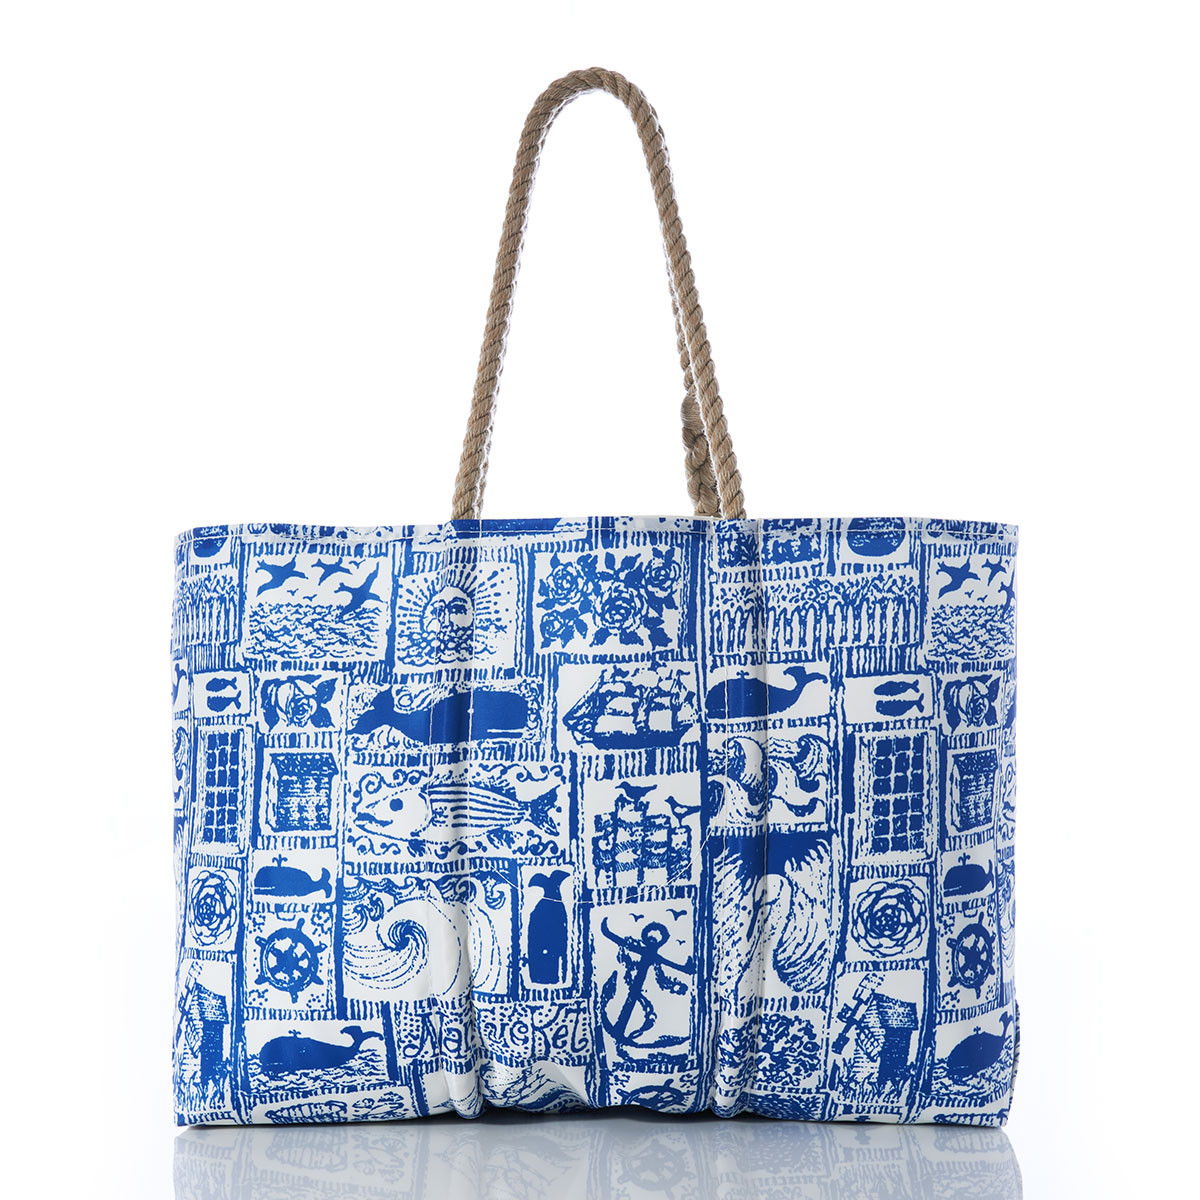 back view of blue squares filled with various nautical imagery printed on recycled sail cloth large tote with hemp rope handles